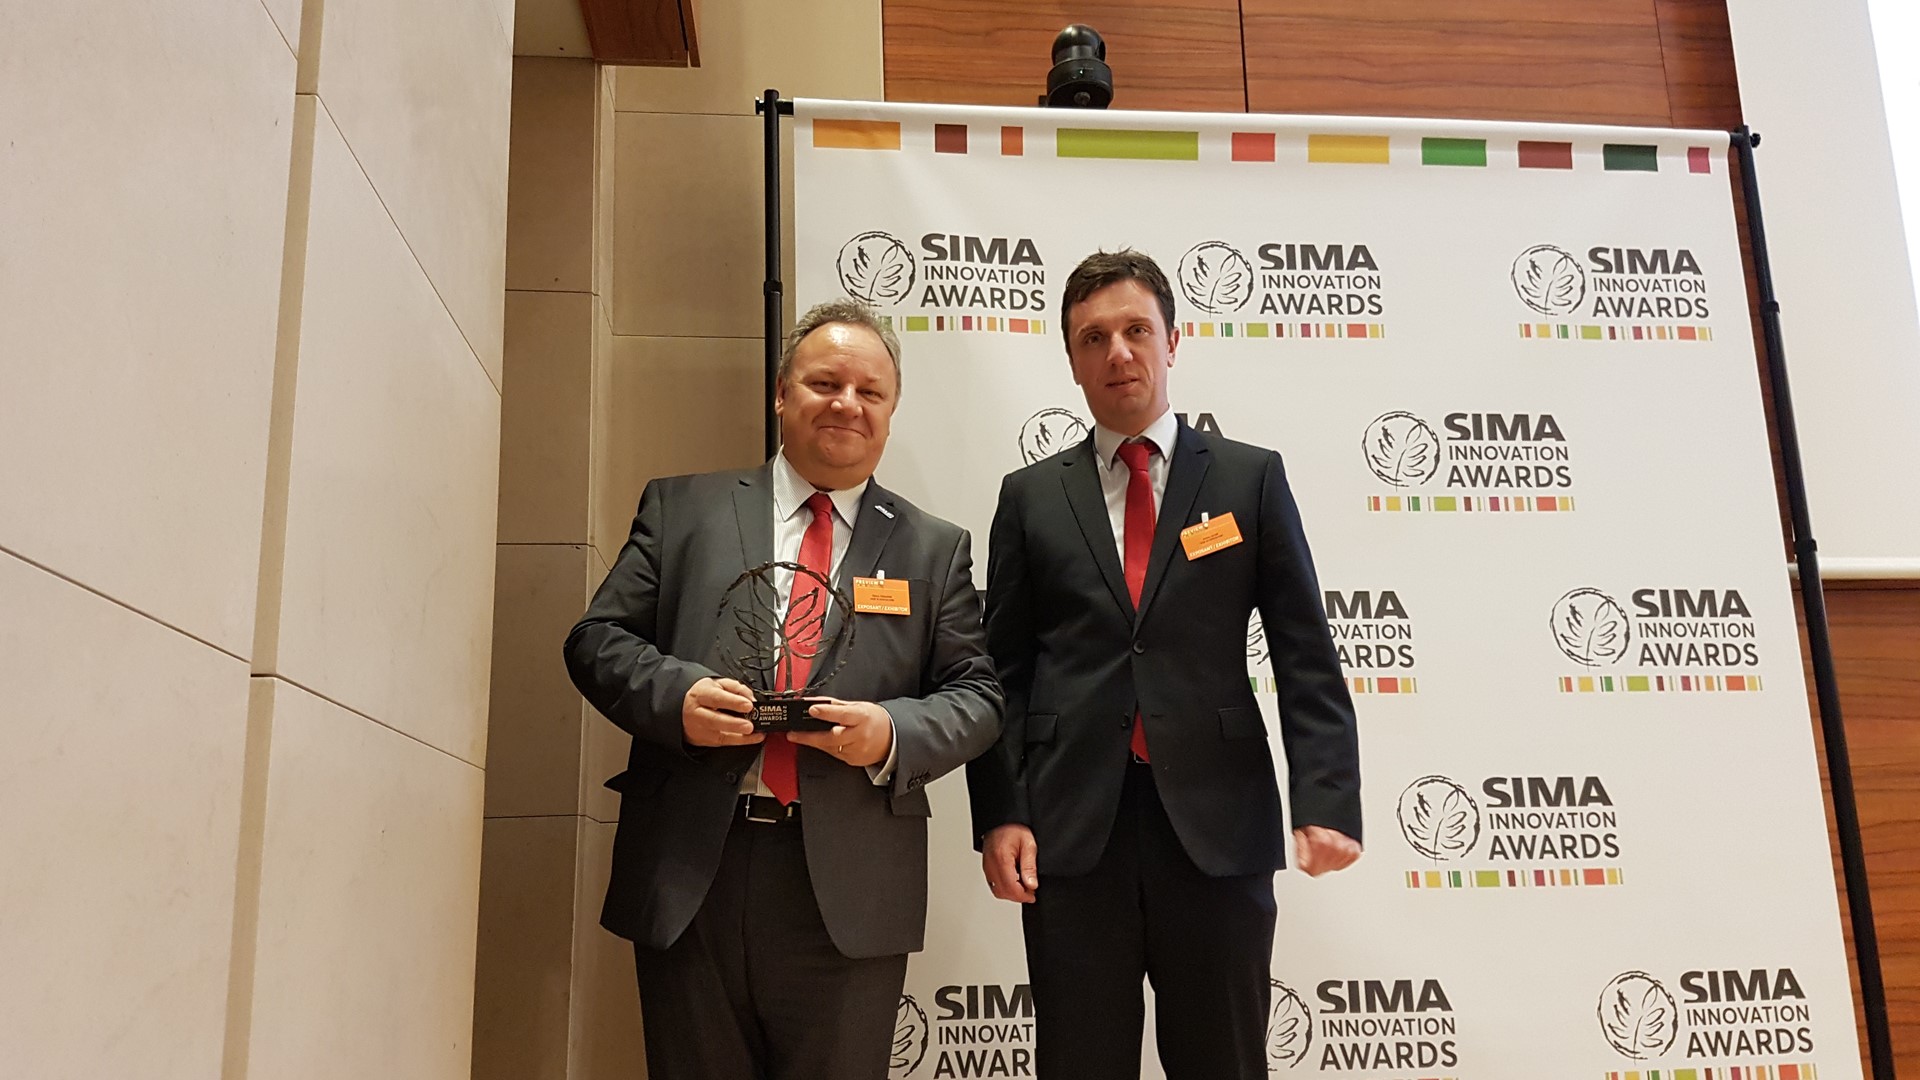 Case IH won the bronze medal a the SIMA Innovation award